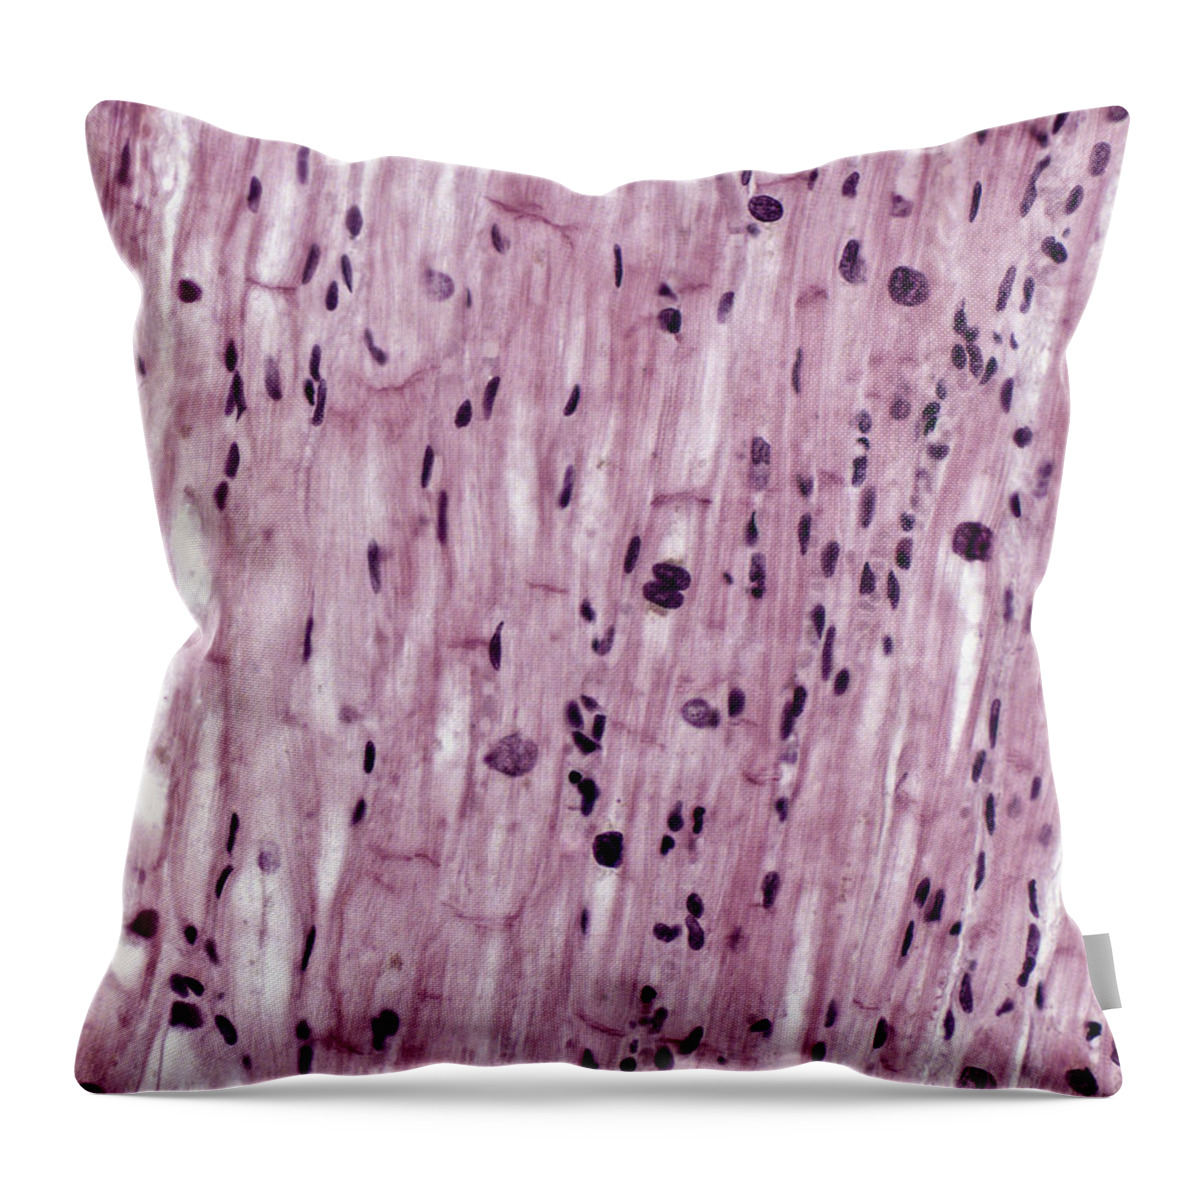 Cardiac Muscle Throw Pillow featuring the photograph Cardiac Muscle With Purkinje Fibers, Lm #2 by Alvin Telser